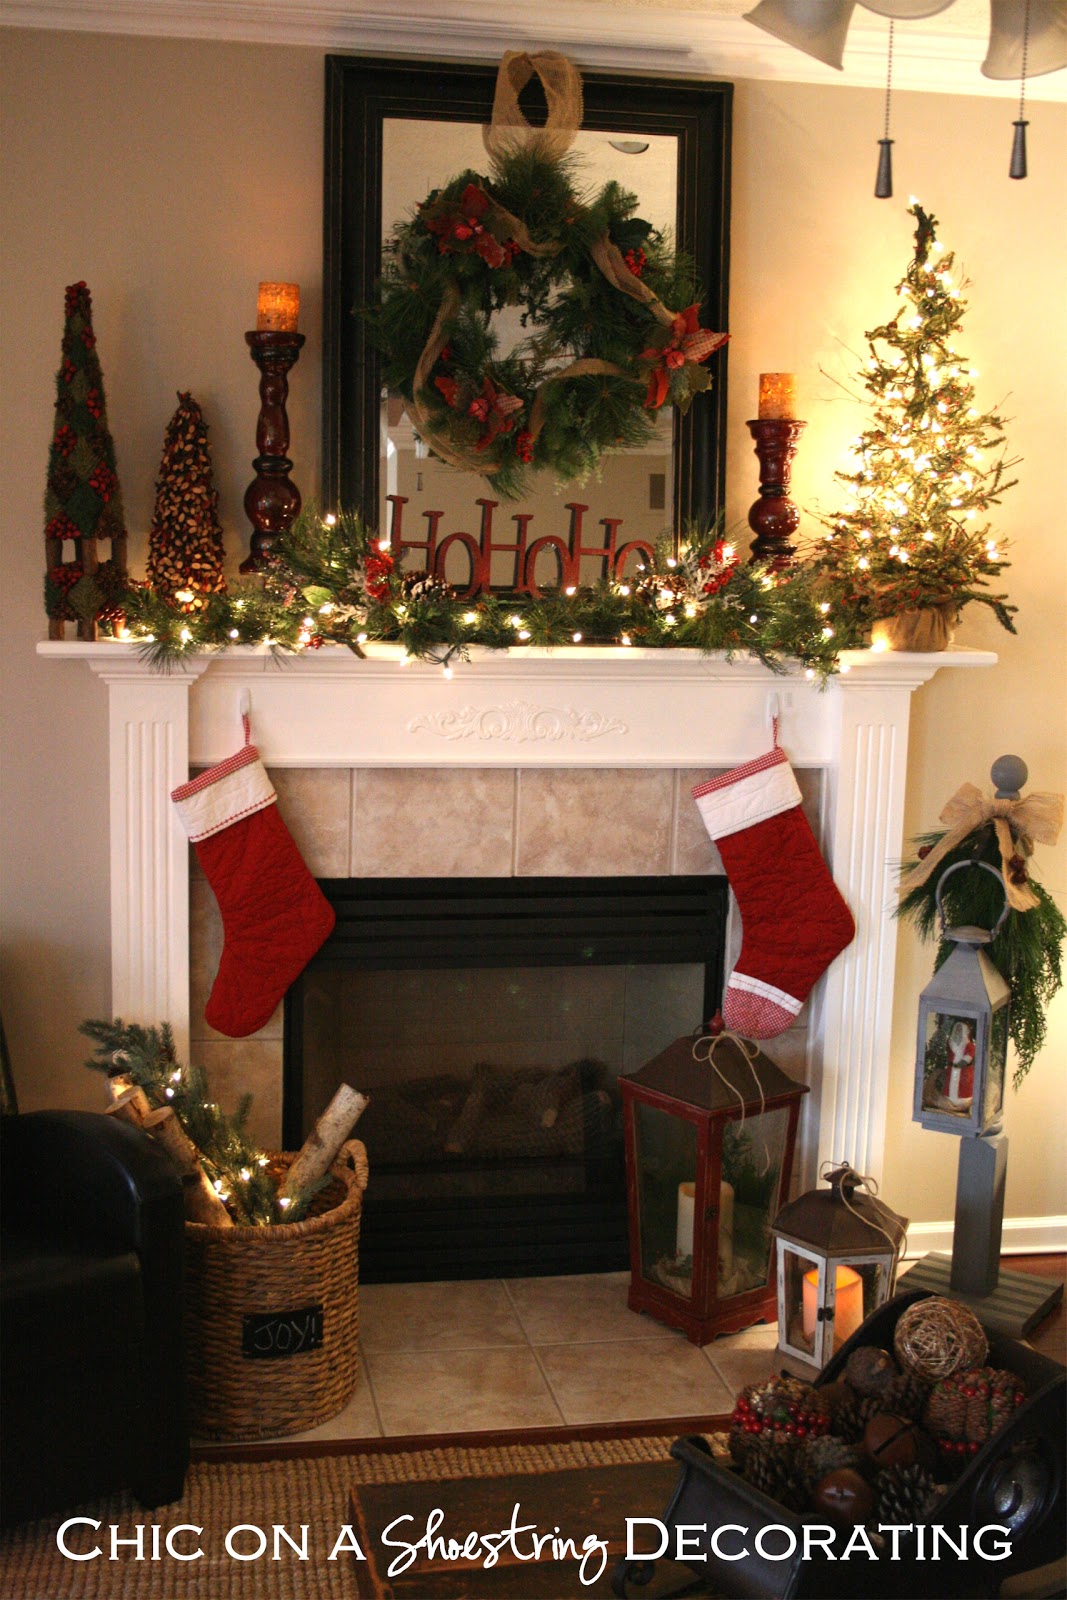 chic on a shoestring decorating rustic christmas mantel mantels decorated for xmas with fireplace christmas door decorations